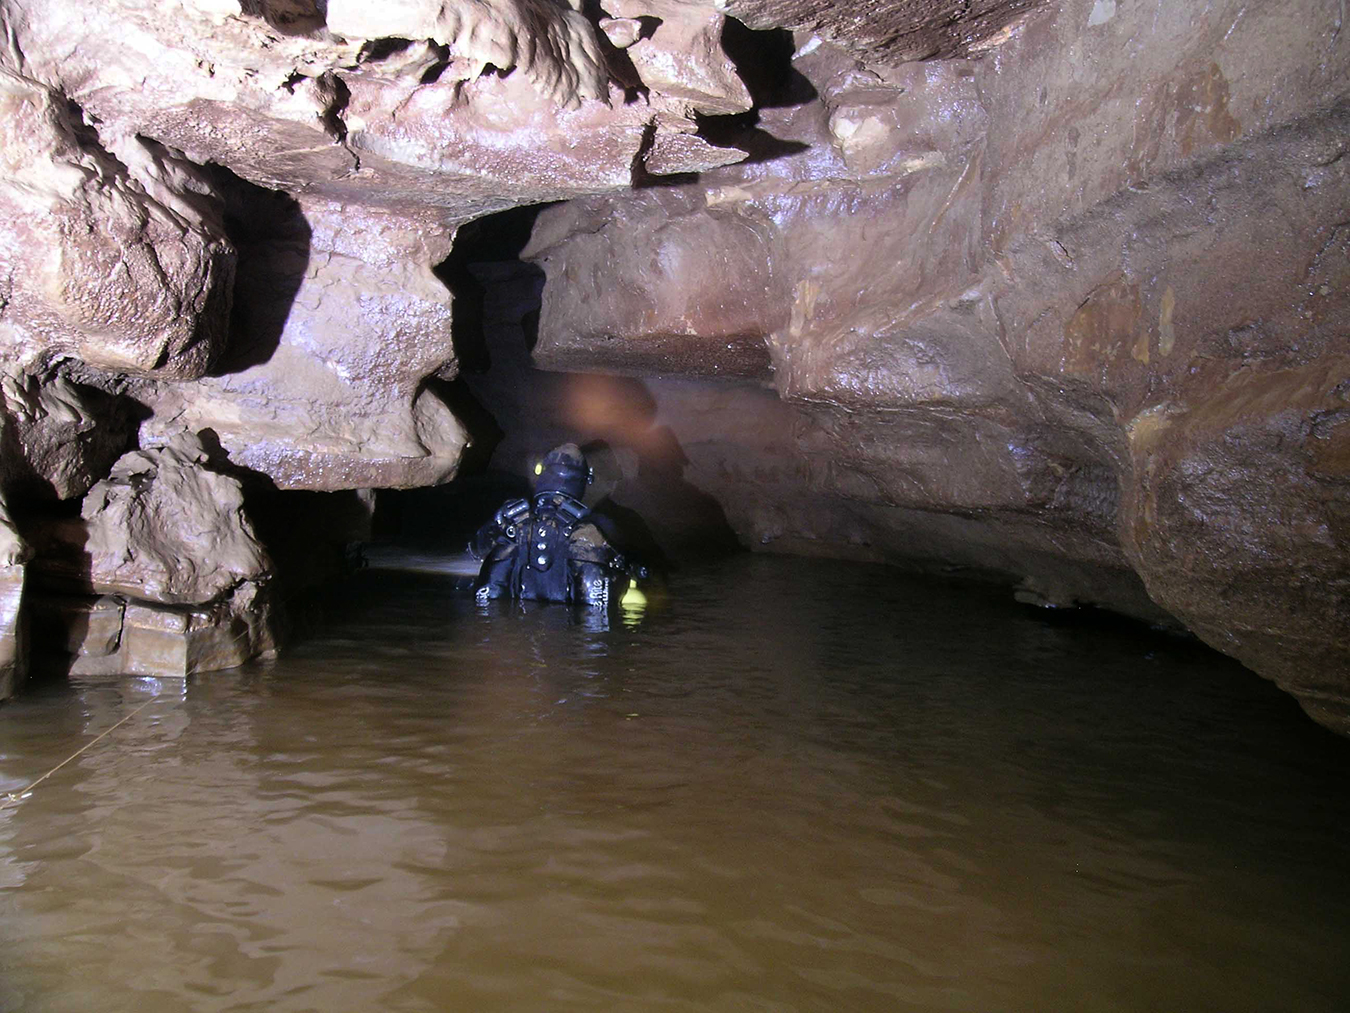 Divers must bring a variety of equipment to keep safe throughout the cave. Some sections have air pockets (as shown here) but others are completely filled with water and silt, making it difficult to see. | Courtesy photo